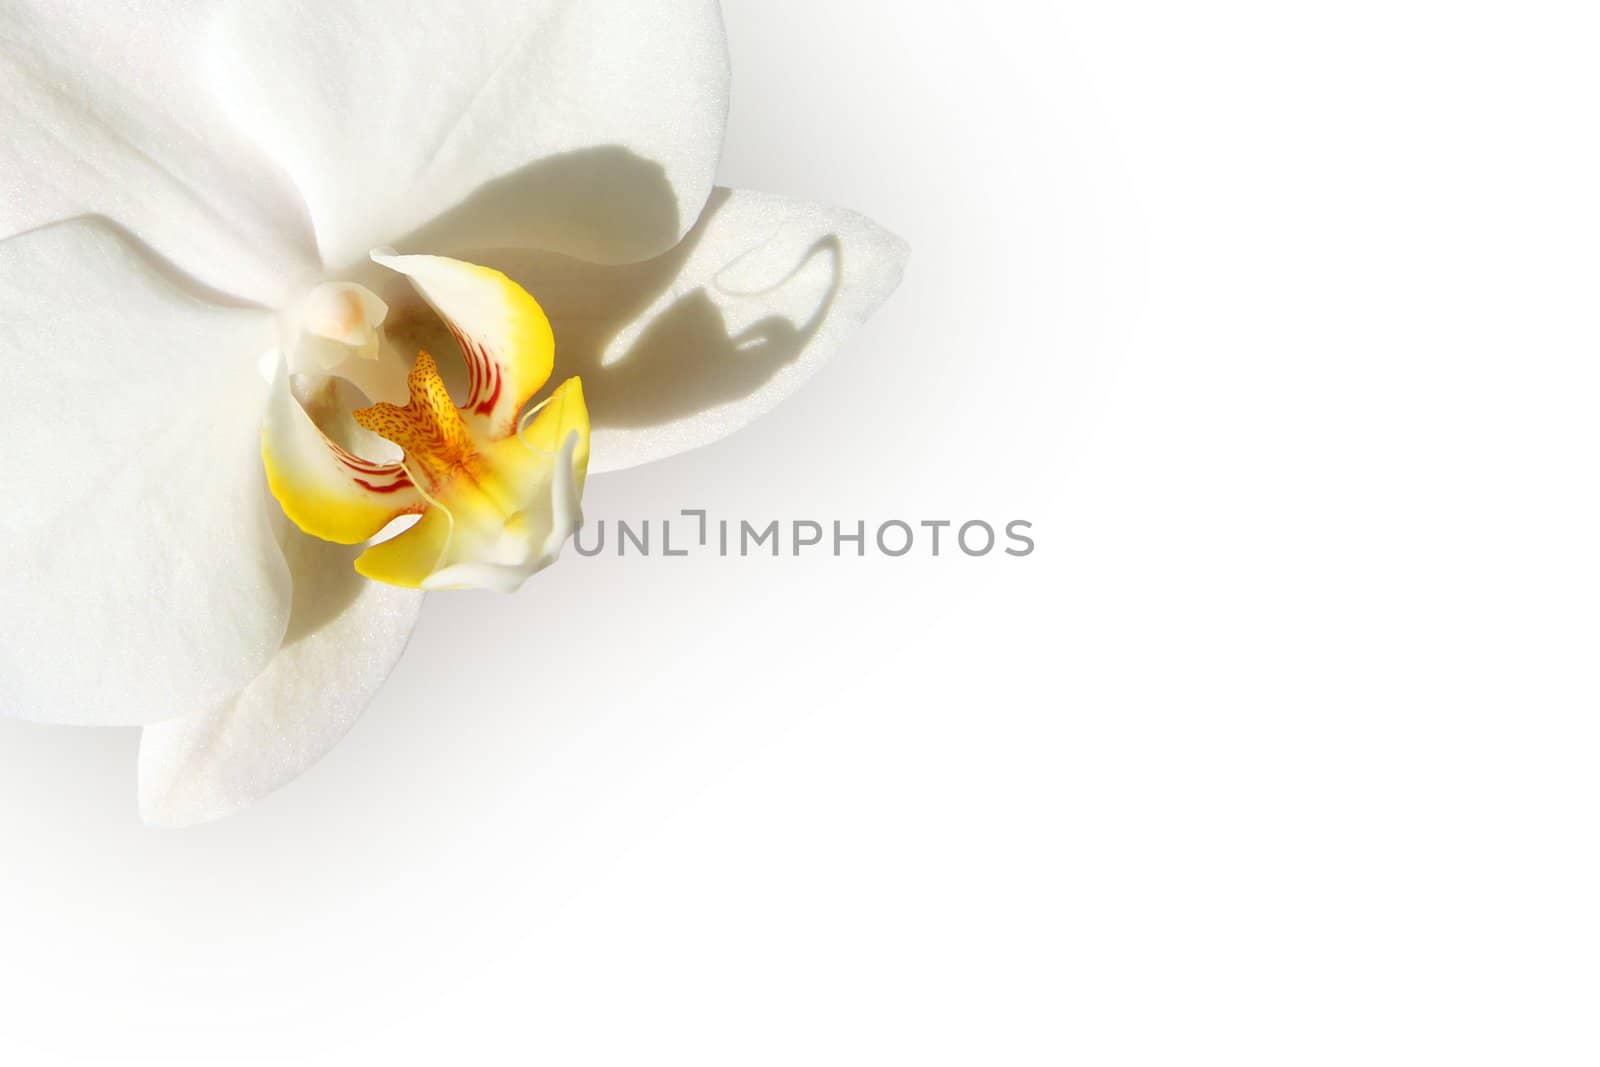 White orchid isolated on a white background